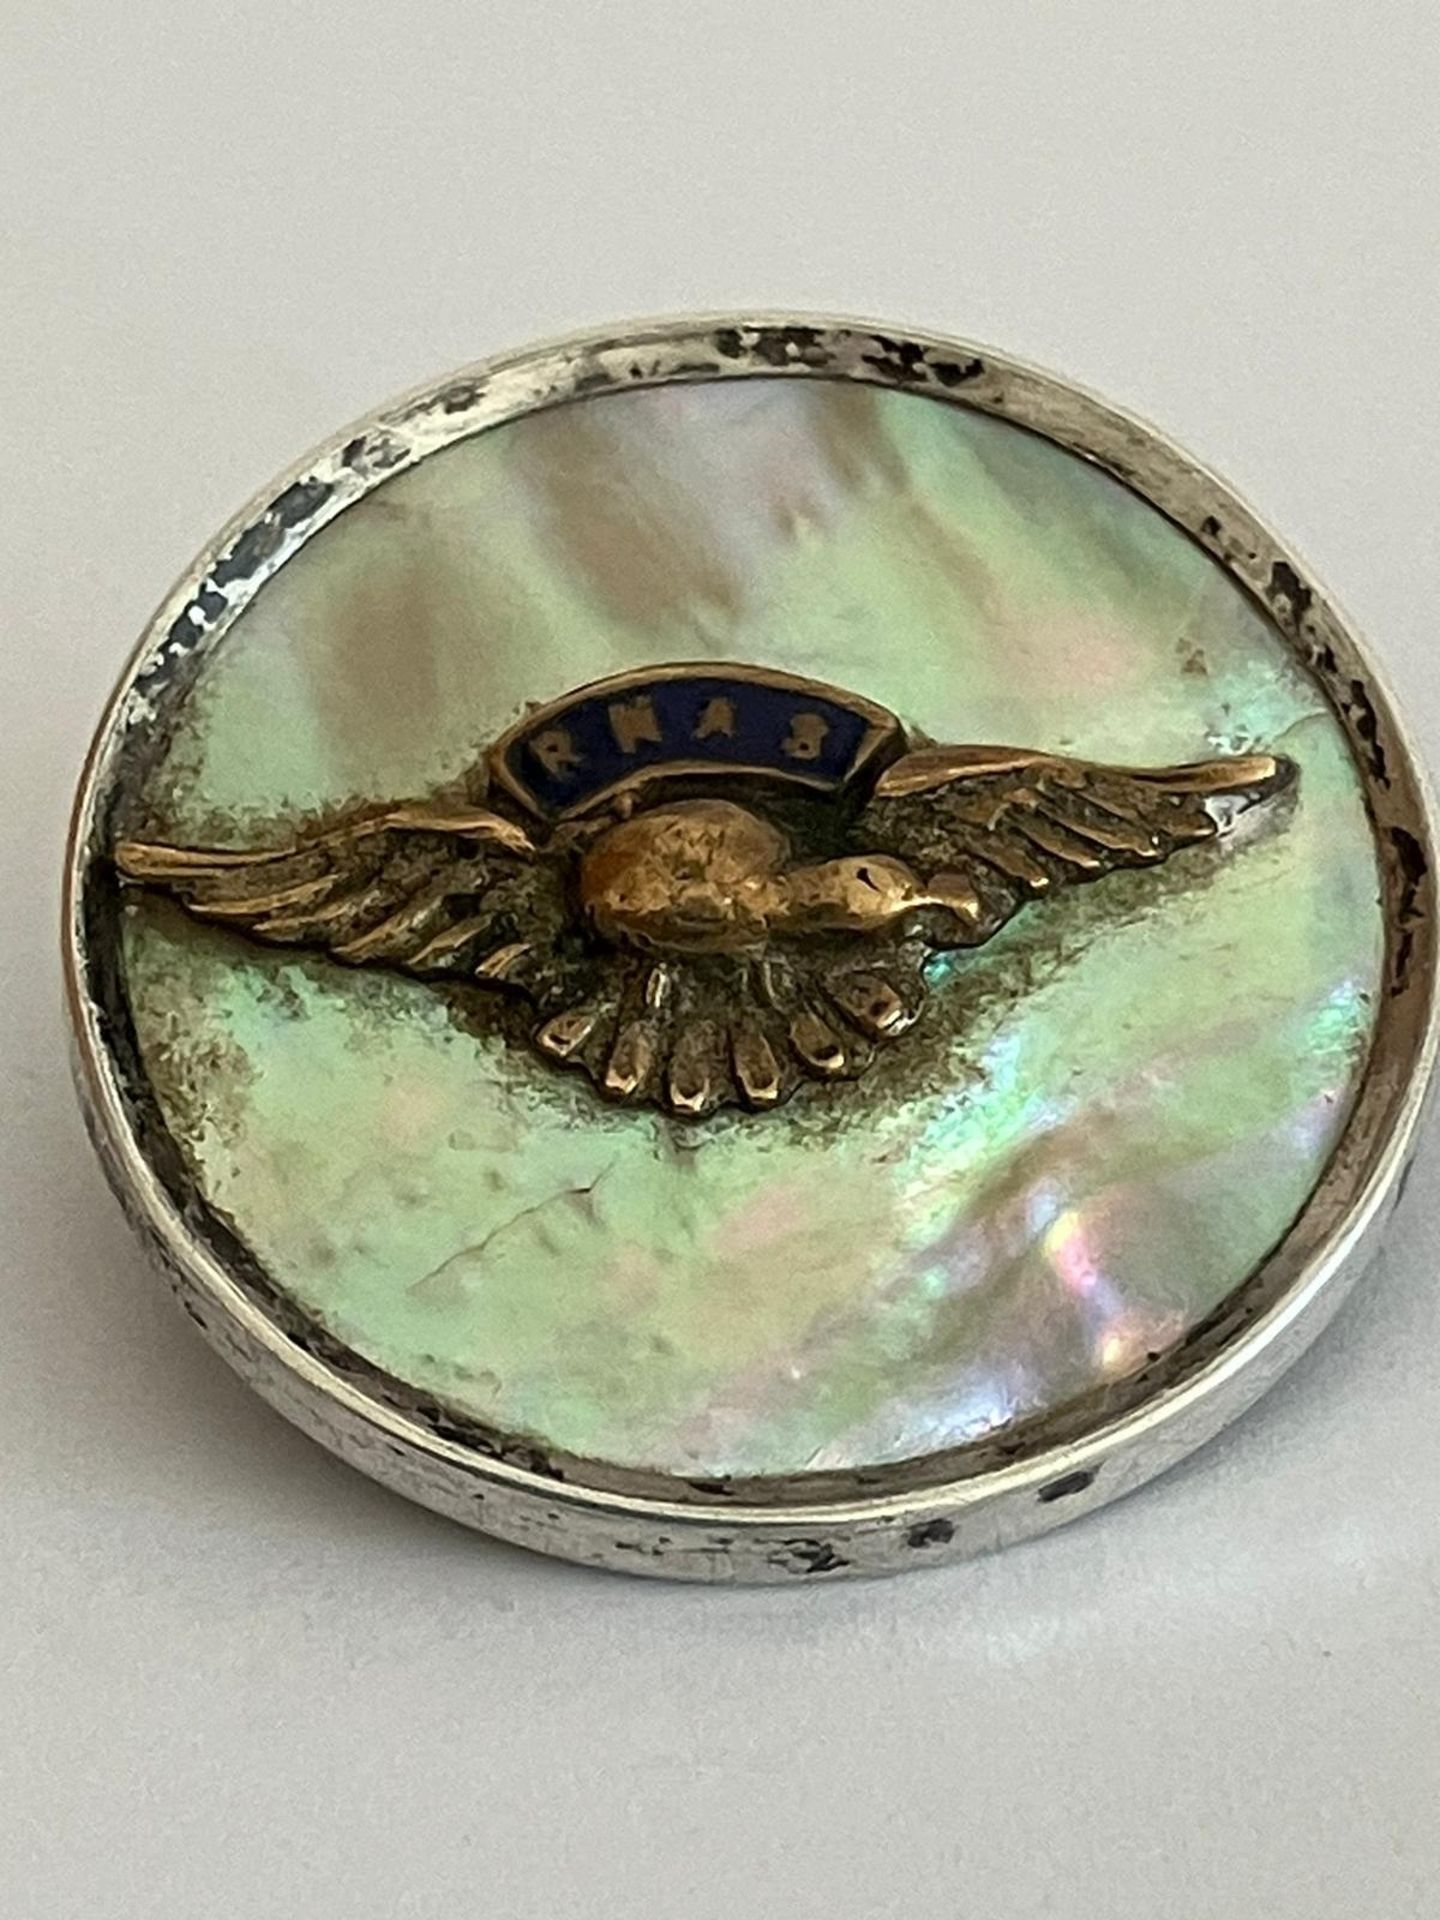 Antique RNAS (pre RAF) SWEETHEART BROOCH. Early World War 1. Golden wings with mother-of-pearl